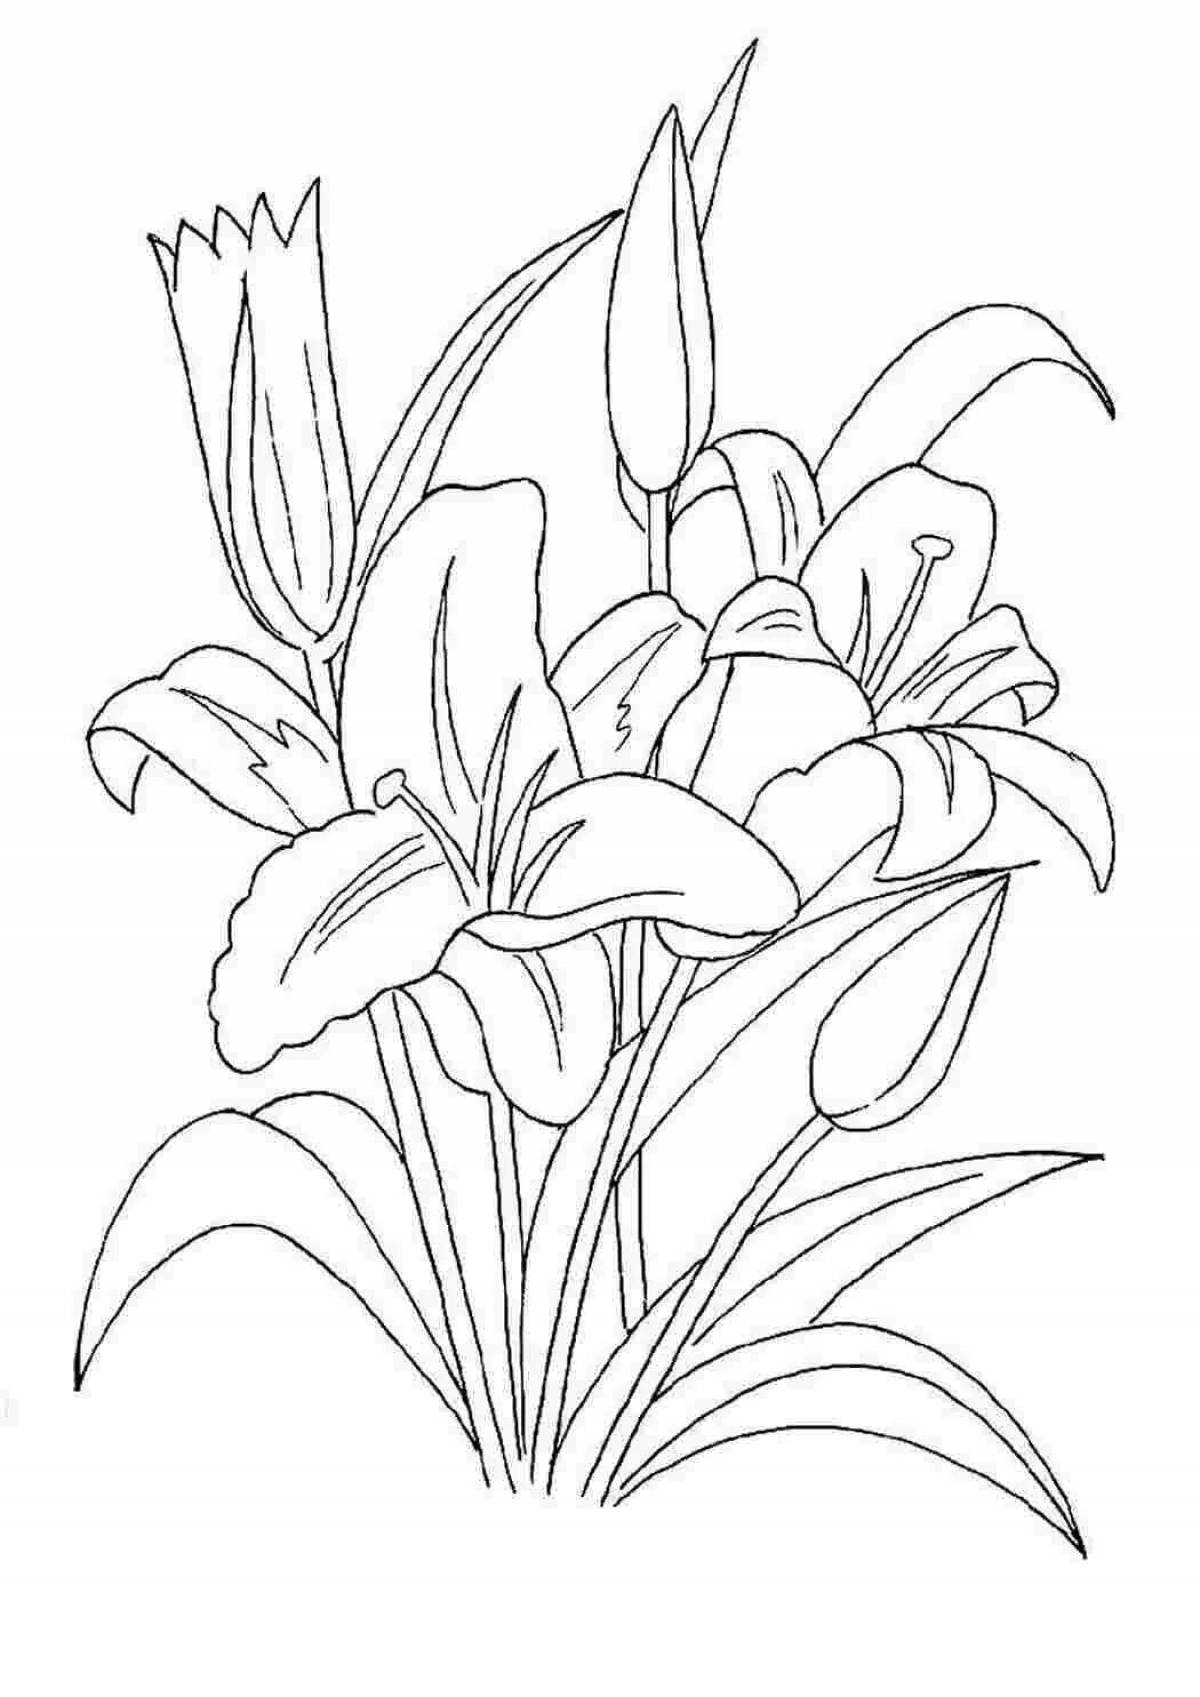 Ecstatic lily coloring pages for children